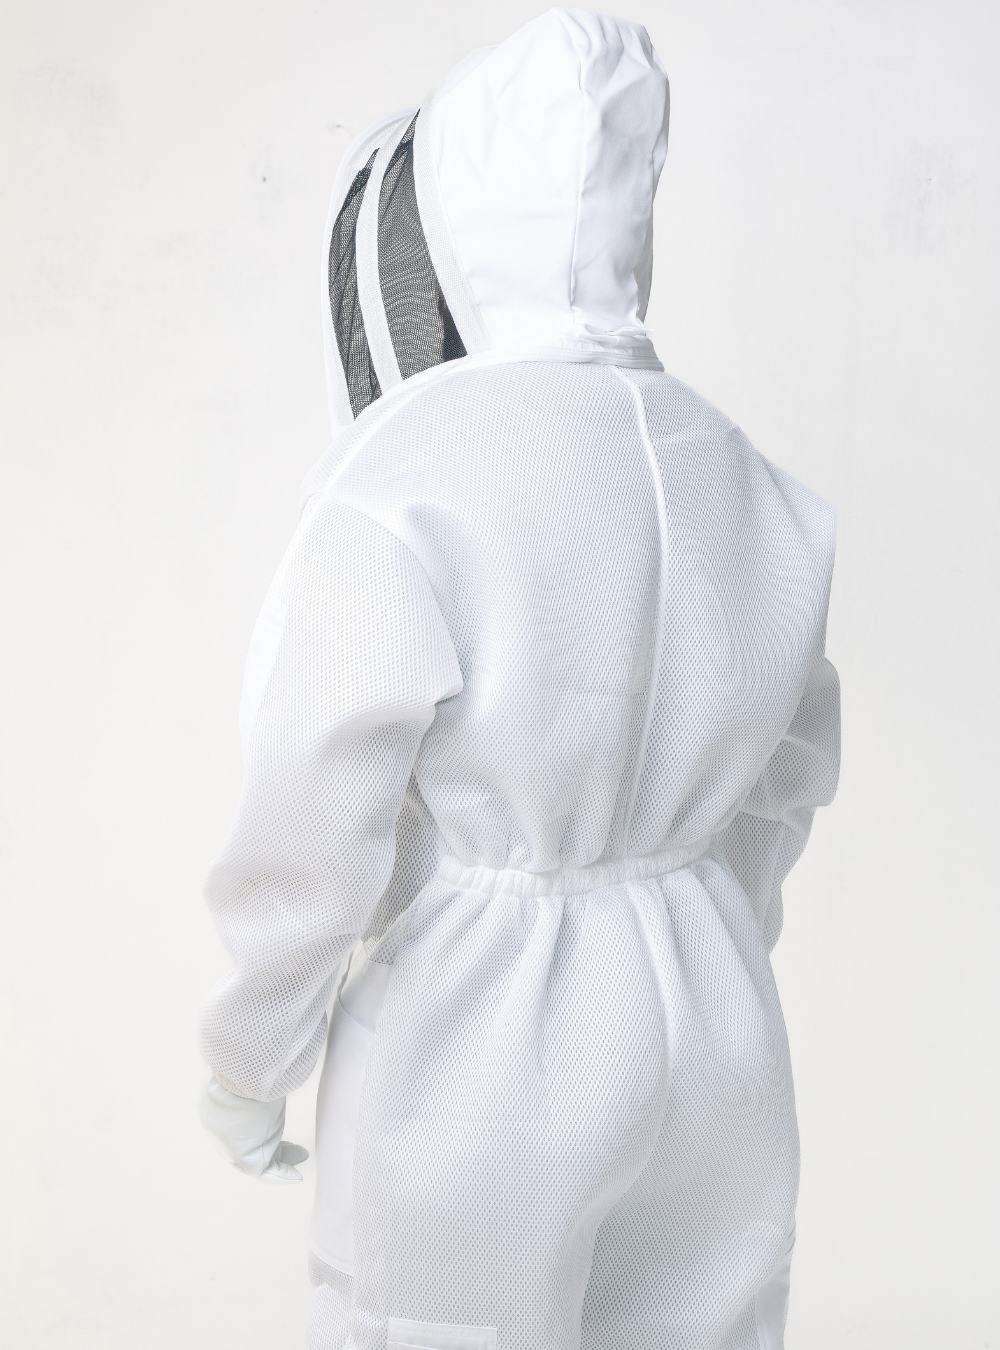 Beekeeper in a white AirFlow Pro Beekeeping Suit with Fencing Veil Back look closeup.